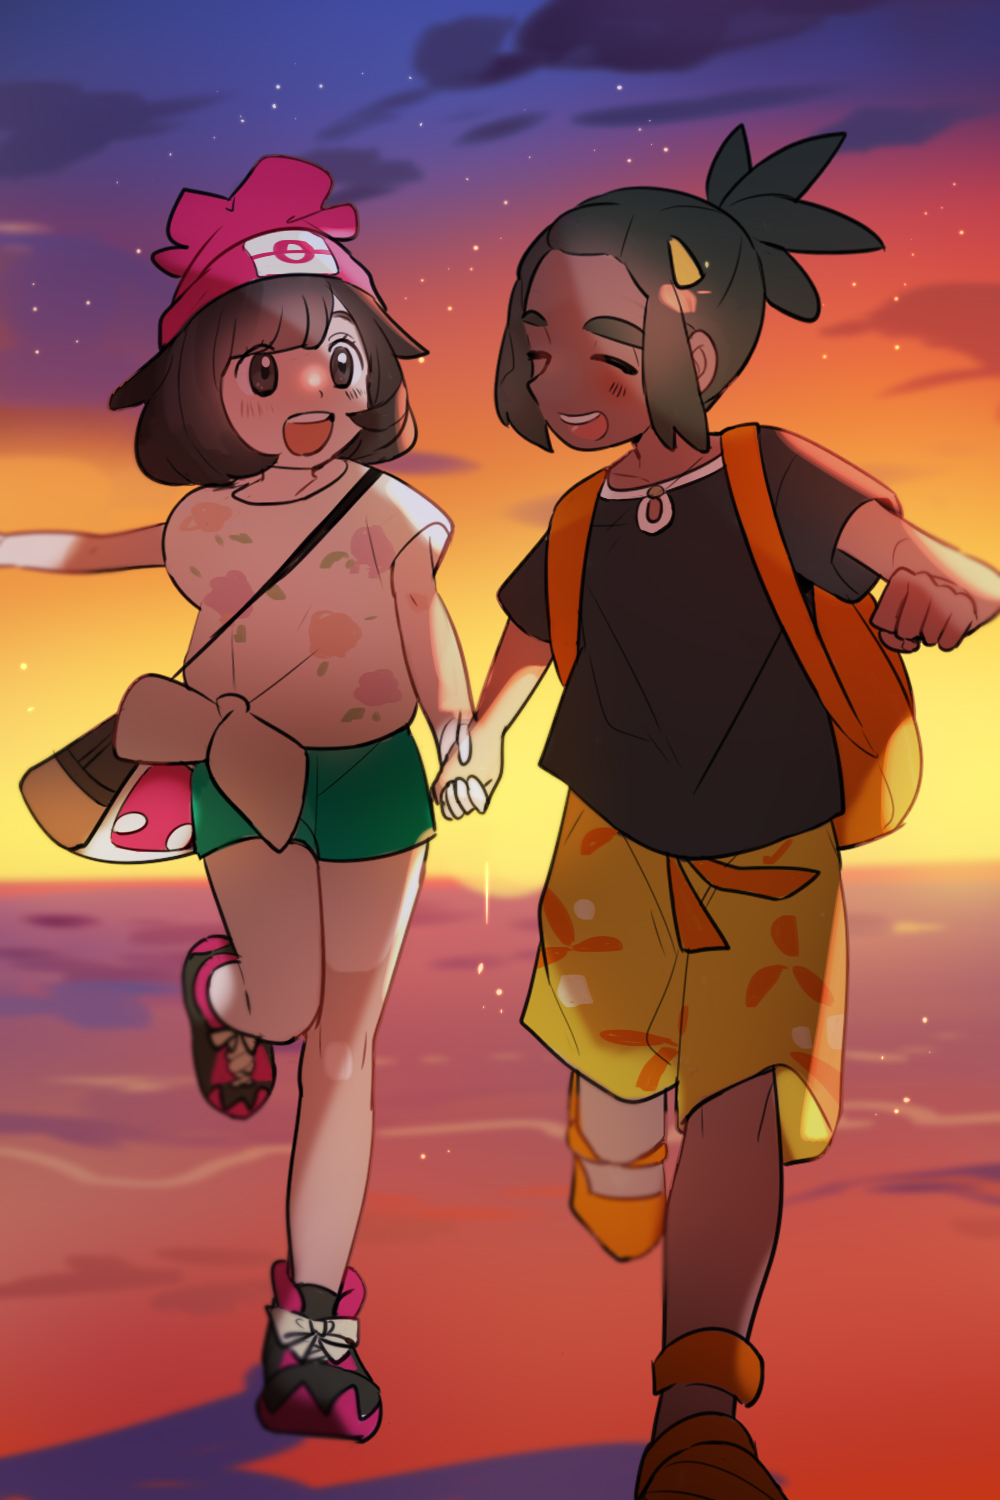 1boy 1girl :d backpack bag bangs beanie blush clenched_hand closed_eyes clouds commentary_request eyelashes green_shorts hat hau_(pokemon) highres holding_hand knees looking_at_another open_mouth orange_bag orange_footwear outdoors picube525528 pokemon pokemon_(game) pokemon_sm running selene_(pokemon) shirt shoes short_shorts short_sleeves shorts shoulder_bag sky smile standing star_(sky) t-shirt teeth tied_shirt twilight yellow_shorts